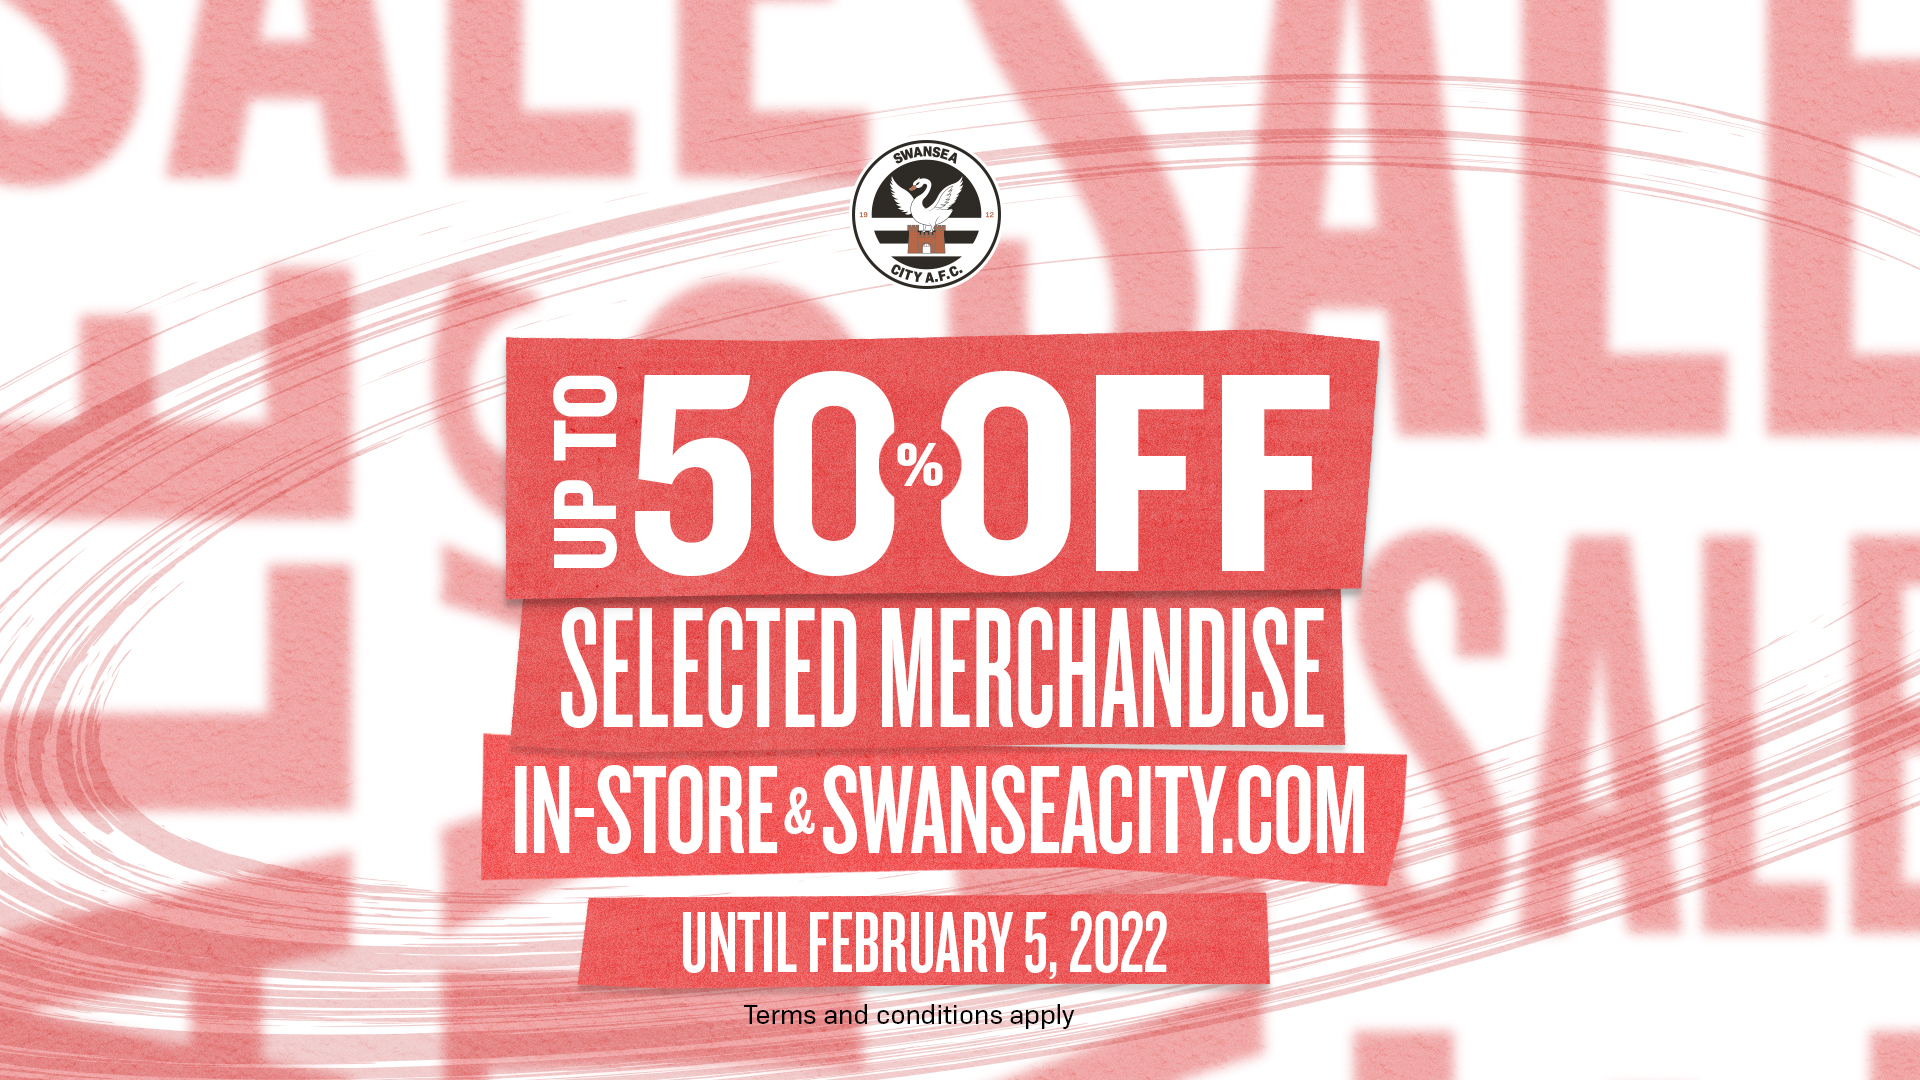 Swans up to 50% off sale